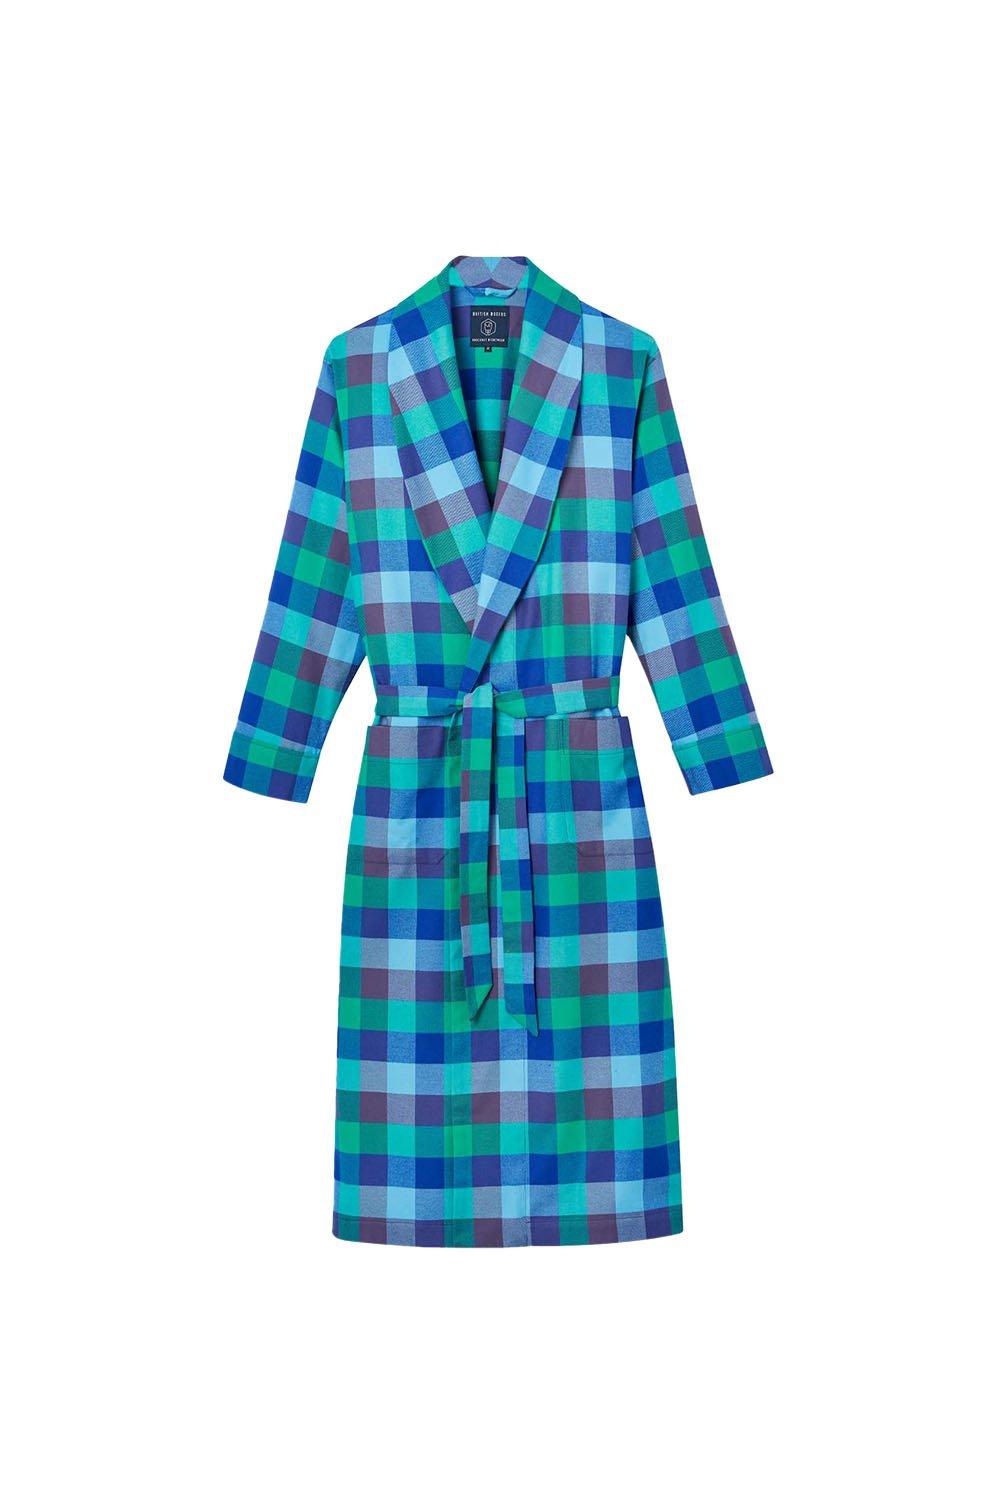 'Shire Square' Blue Check Brushed Cotton Dressing Gown